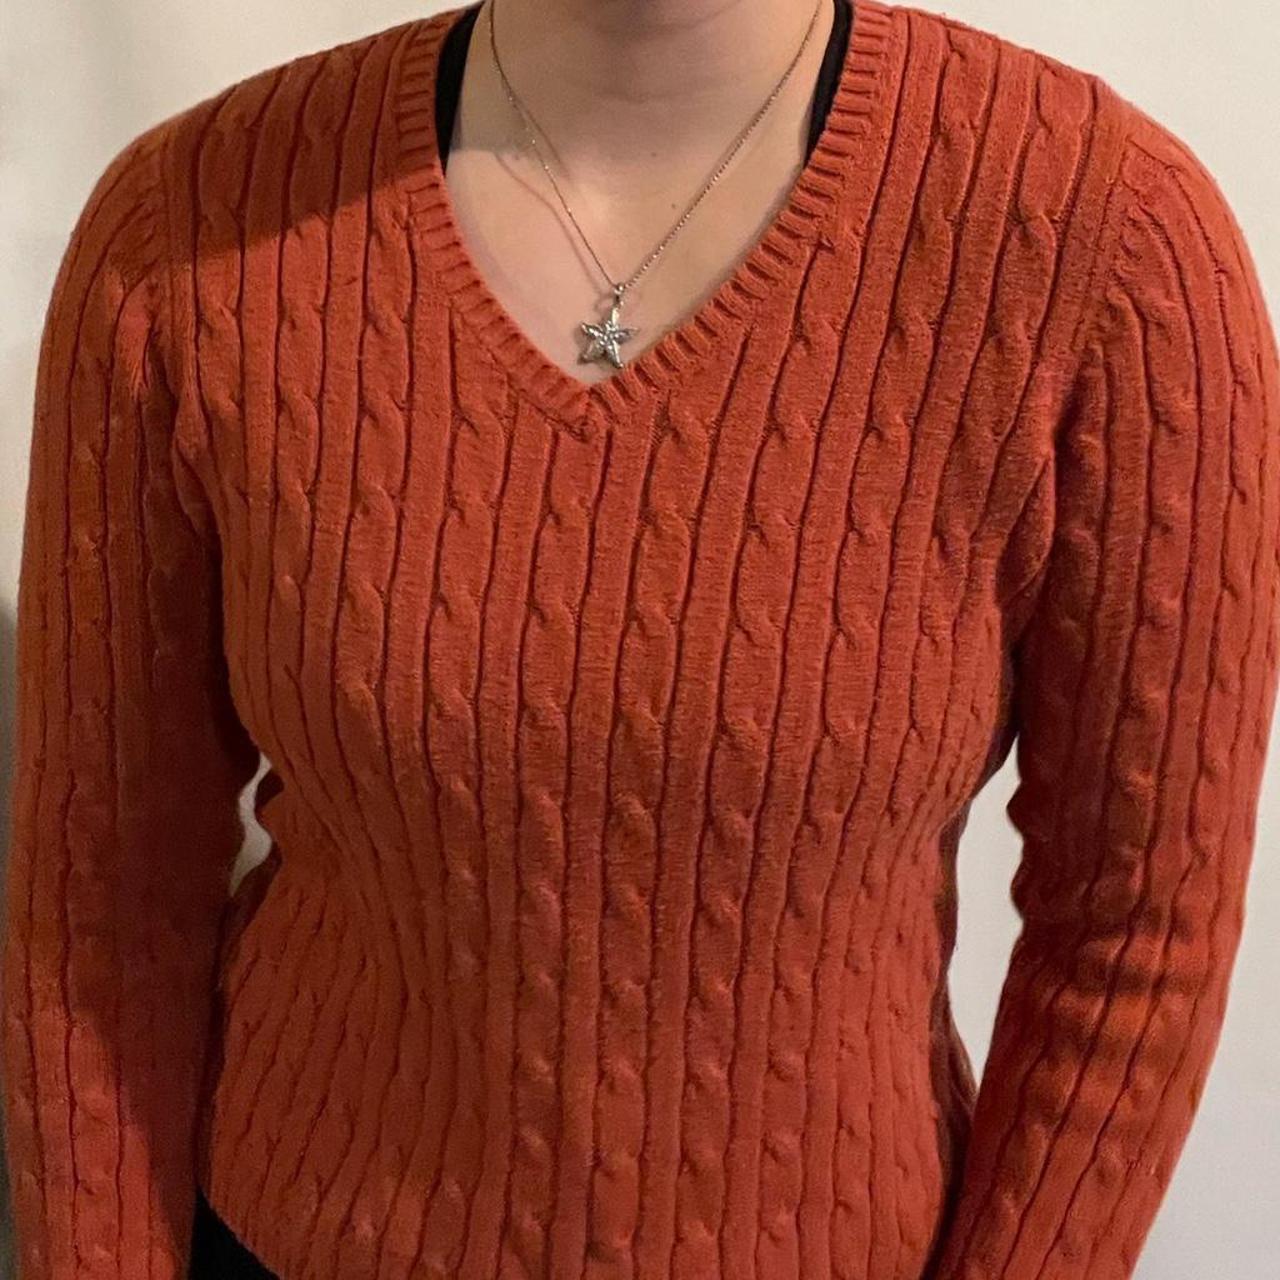 Product Image 2 - FITTED BURNT ORANGE KNITTED SWEATER!!